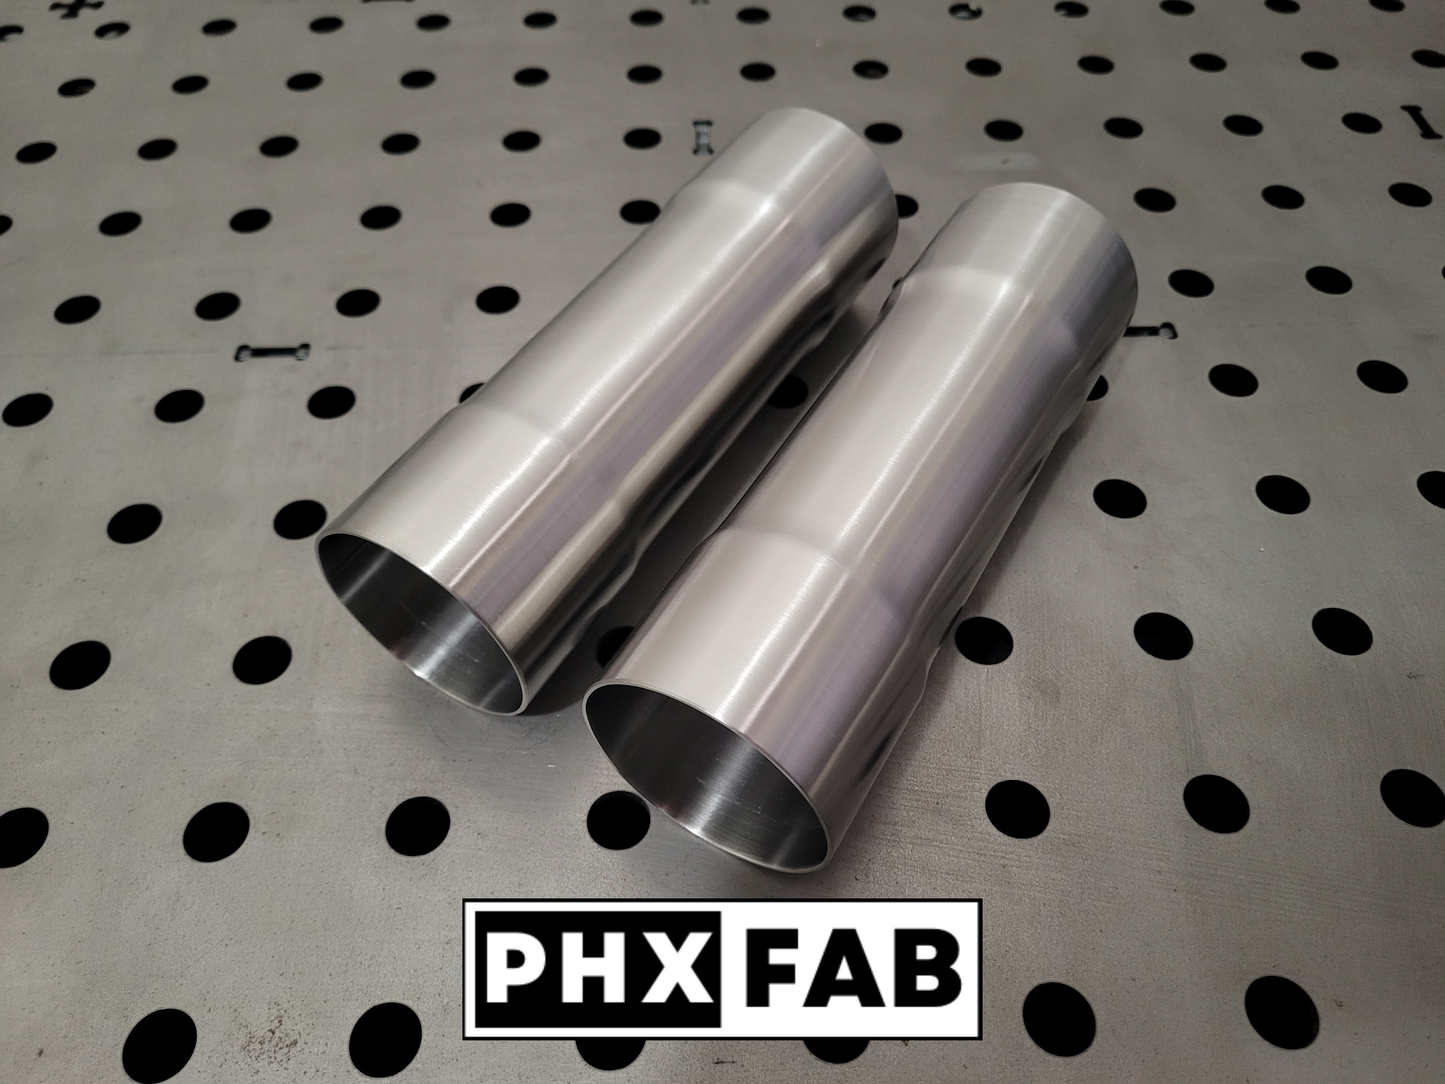 (2) 1 3/4" ID to 1 3/4" ID X 8" Length Stainless Coupler Exhaust Pipe Connector Adapter 304 Stainless Steel